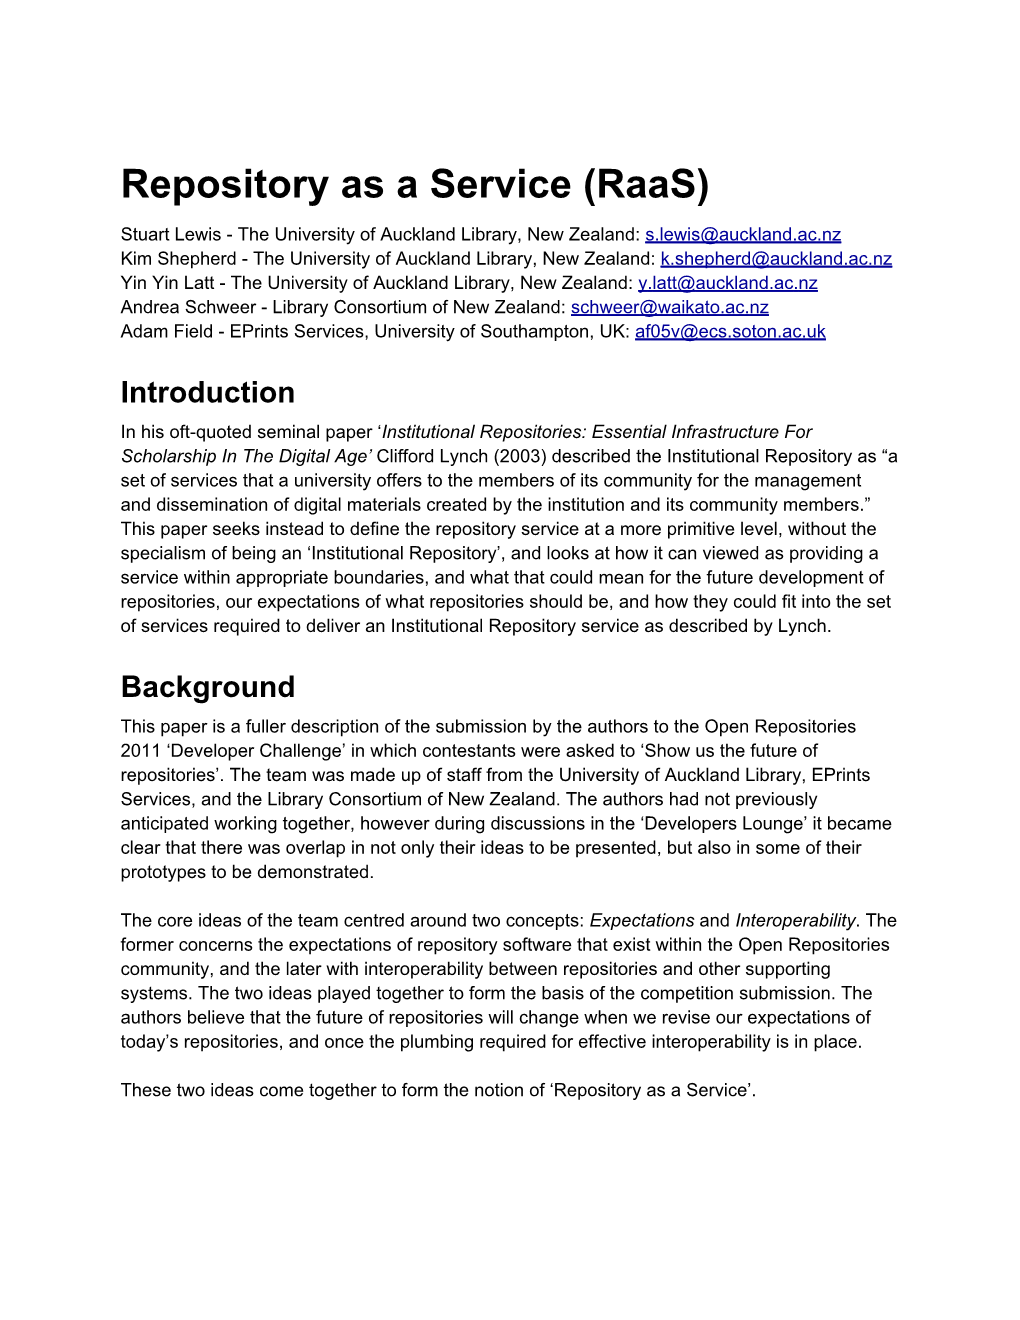 Repository As a Service (Raas)